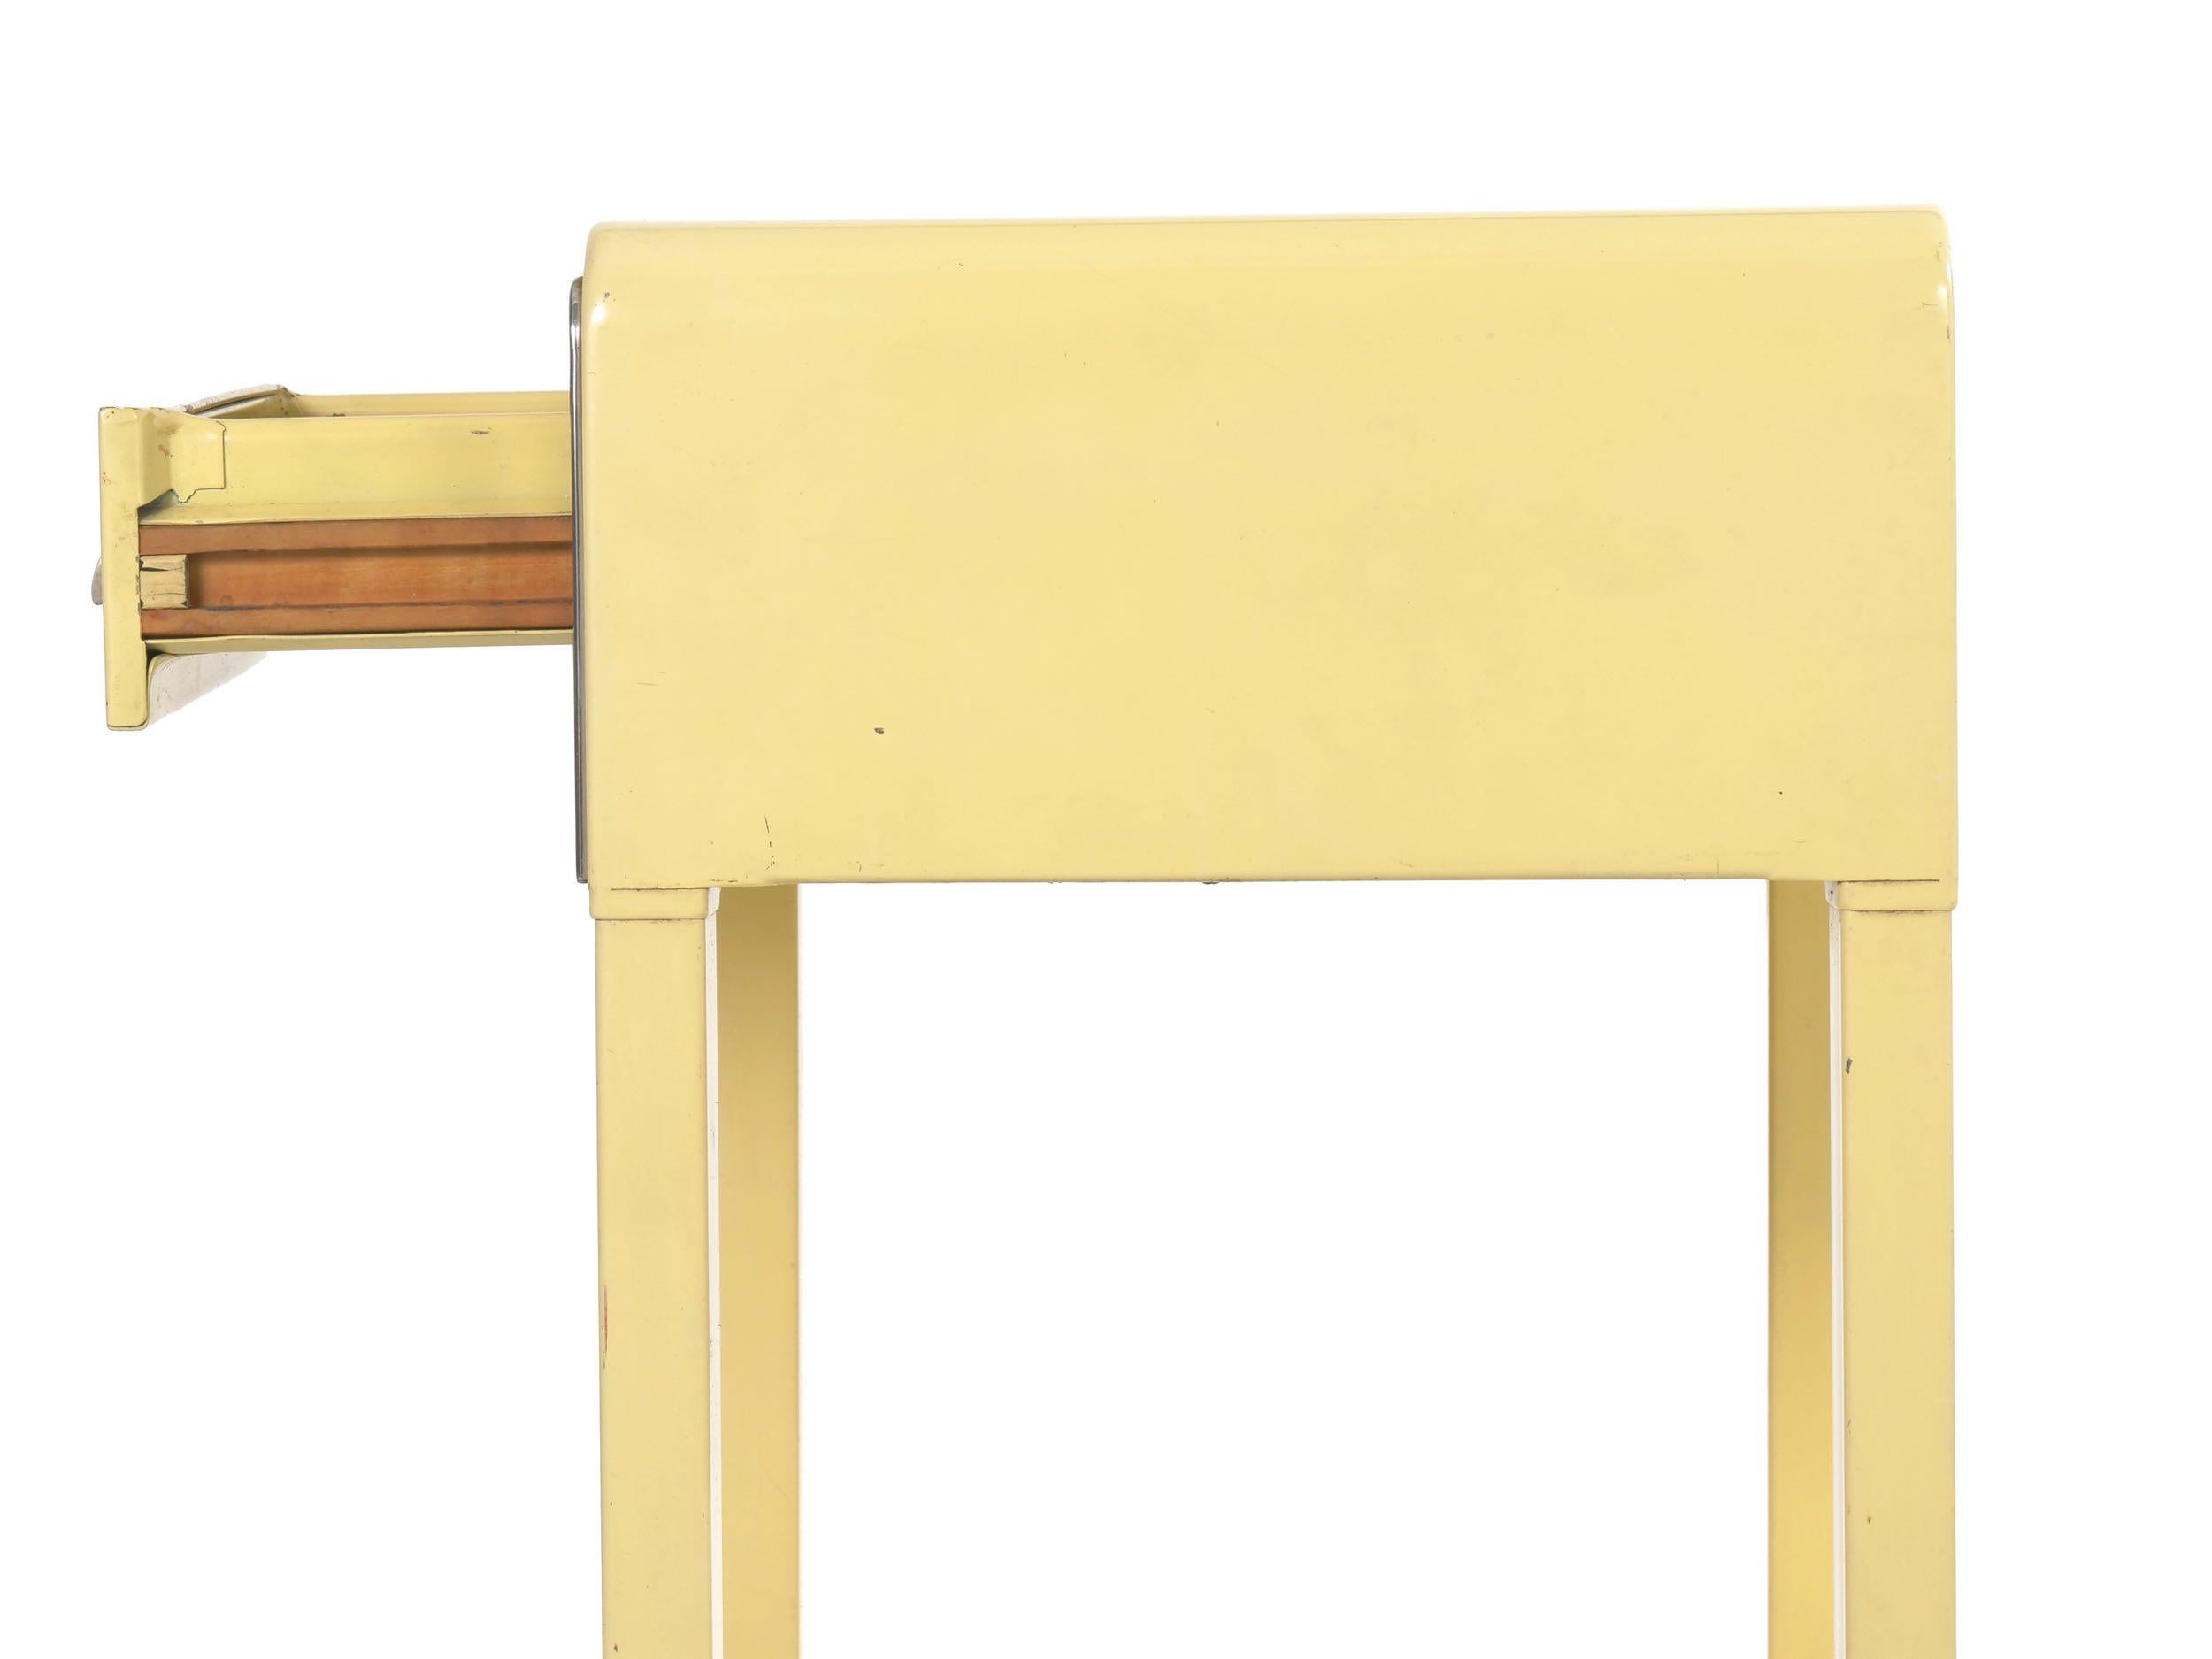 Steel Streamline Moderne Nightstand Table by Norman Bel Geddes for Simmons